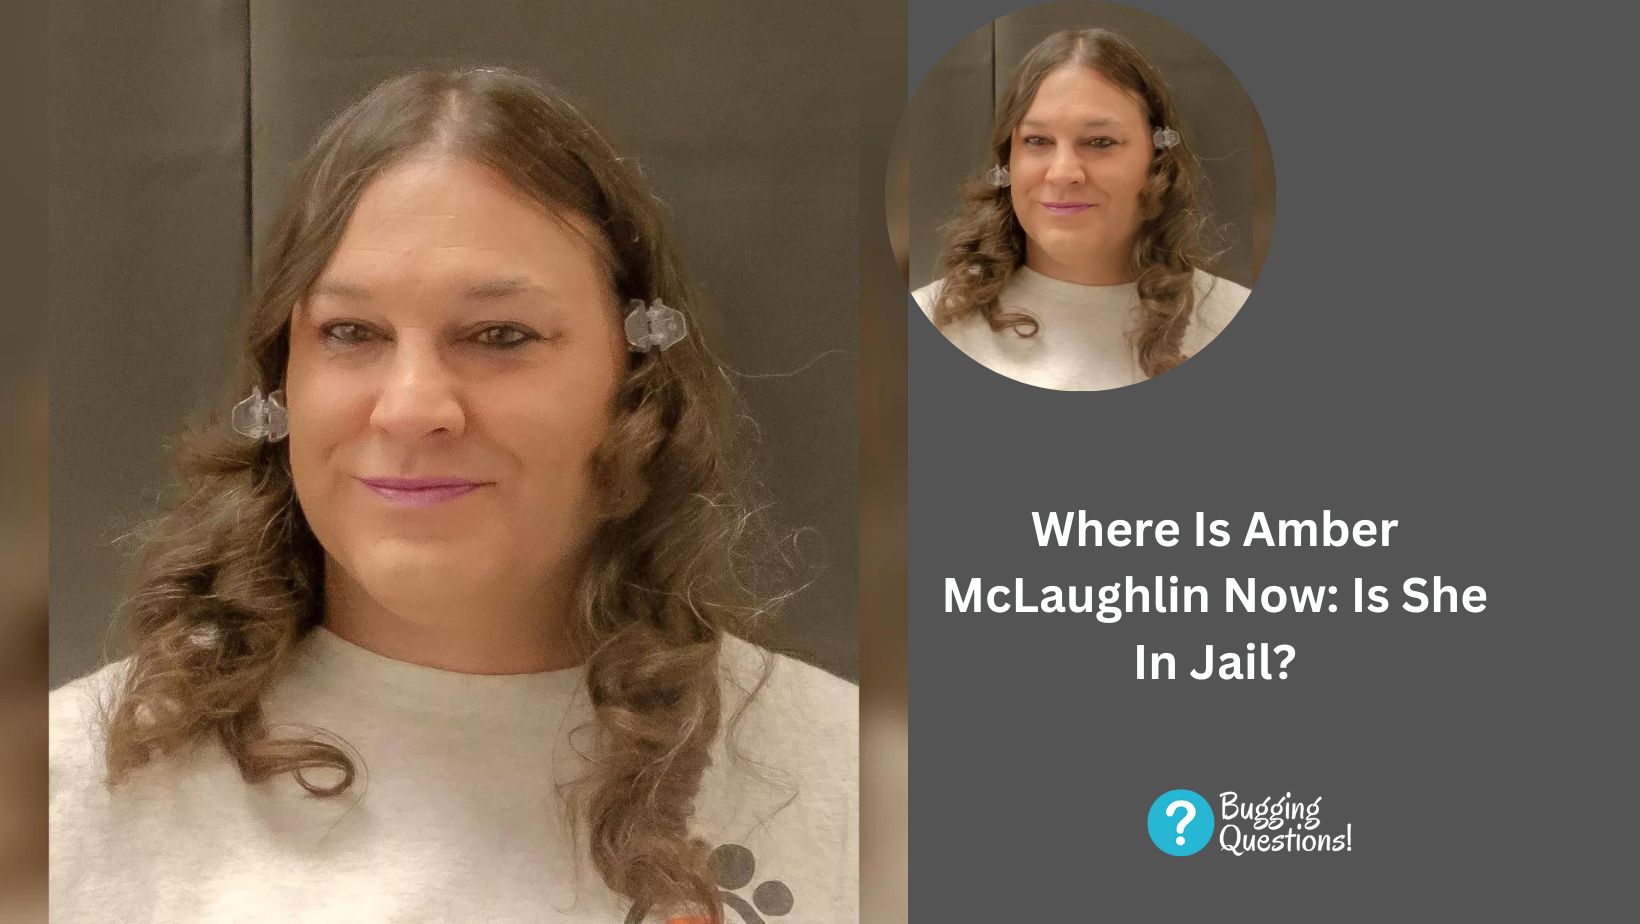 Where Is Amber McLaughlin Now: Is She In Jail?